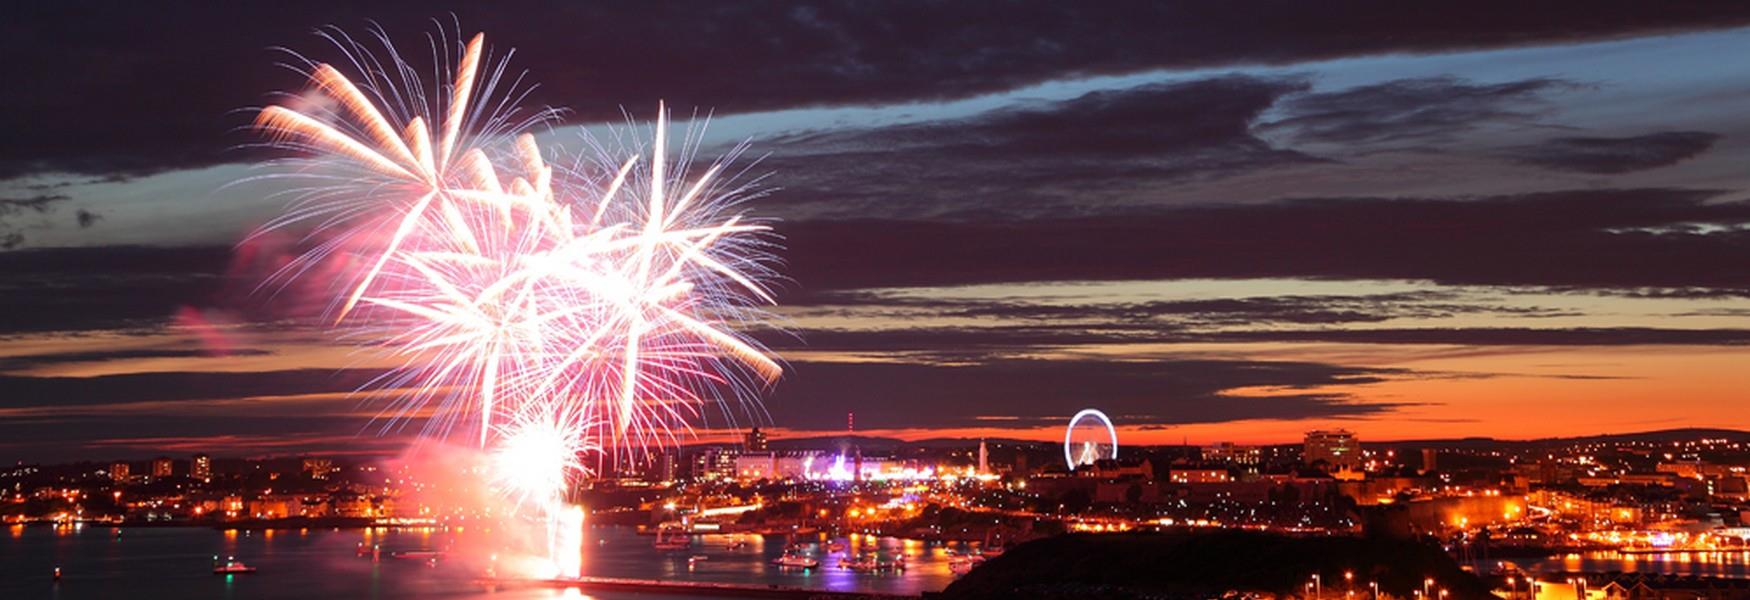 National Fireworks Championship Plymouth